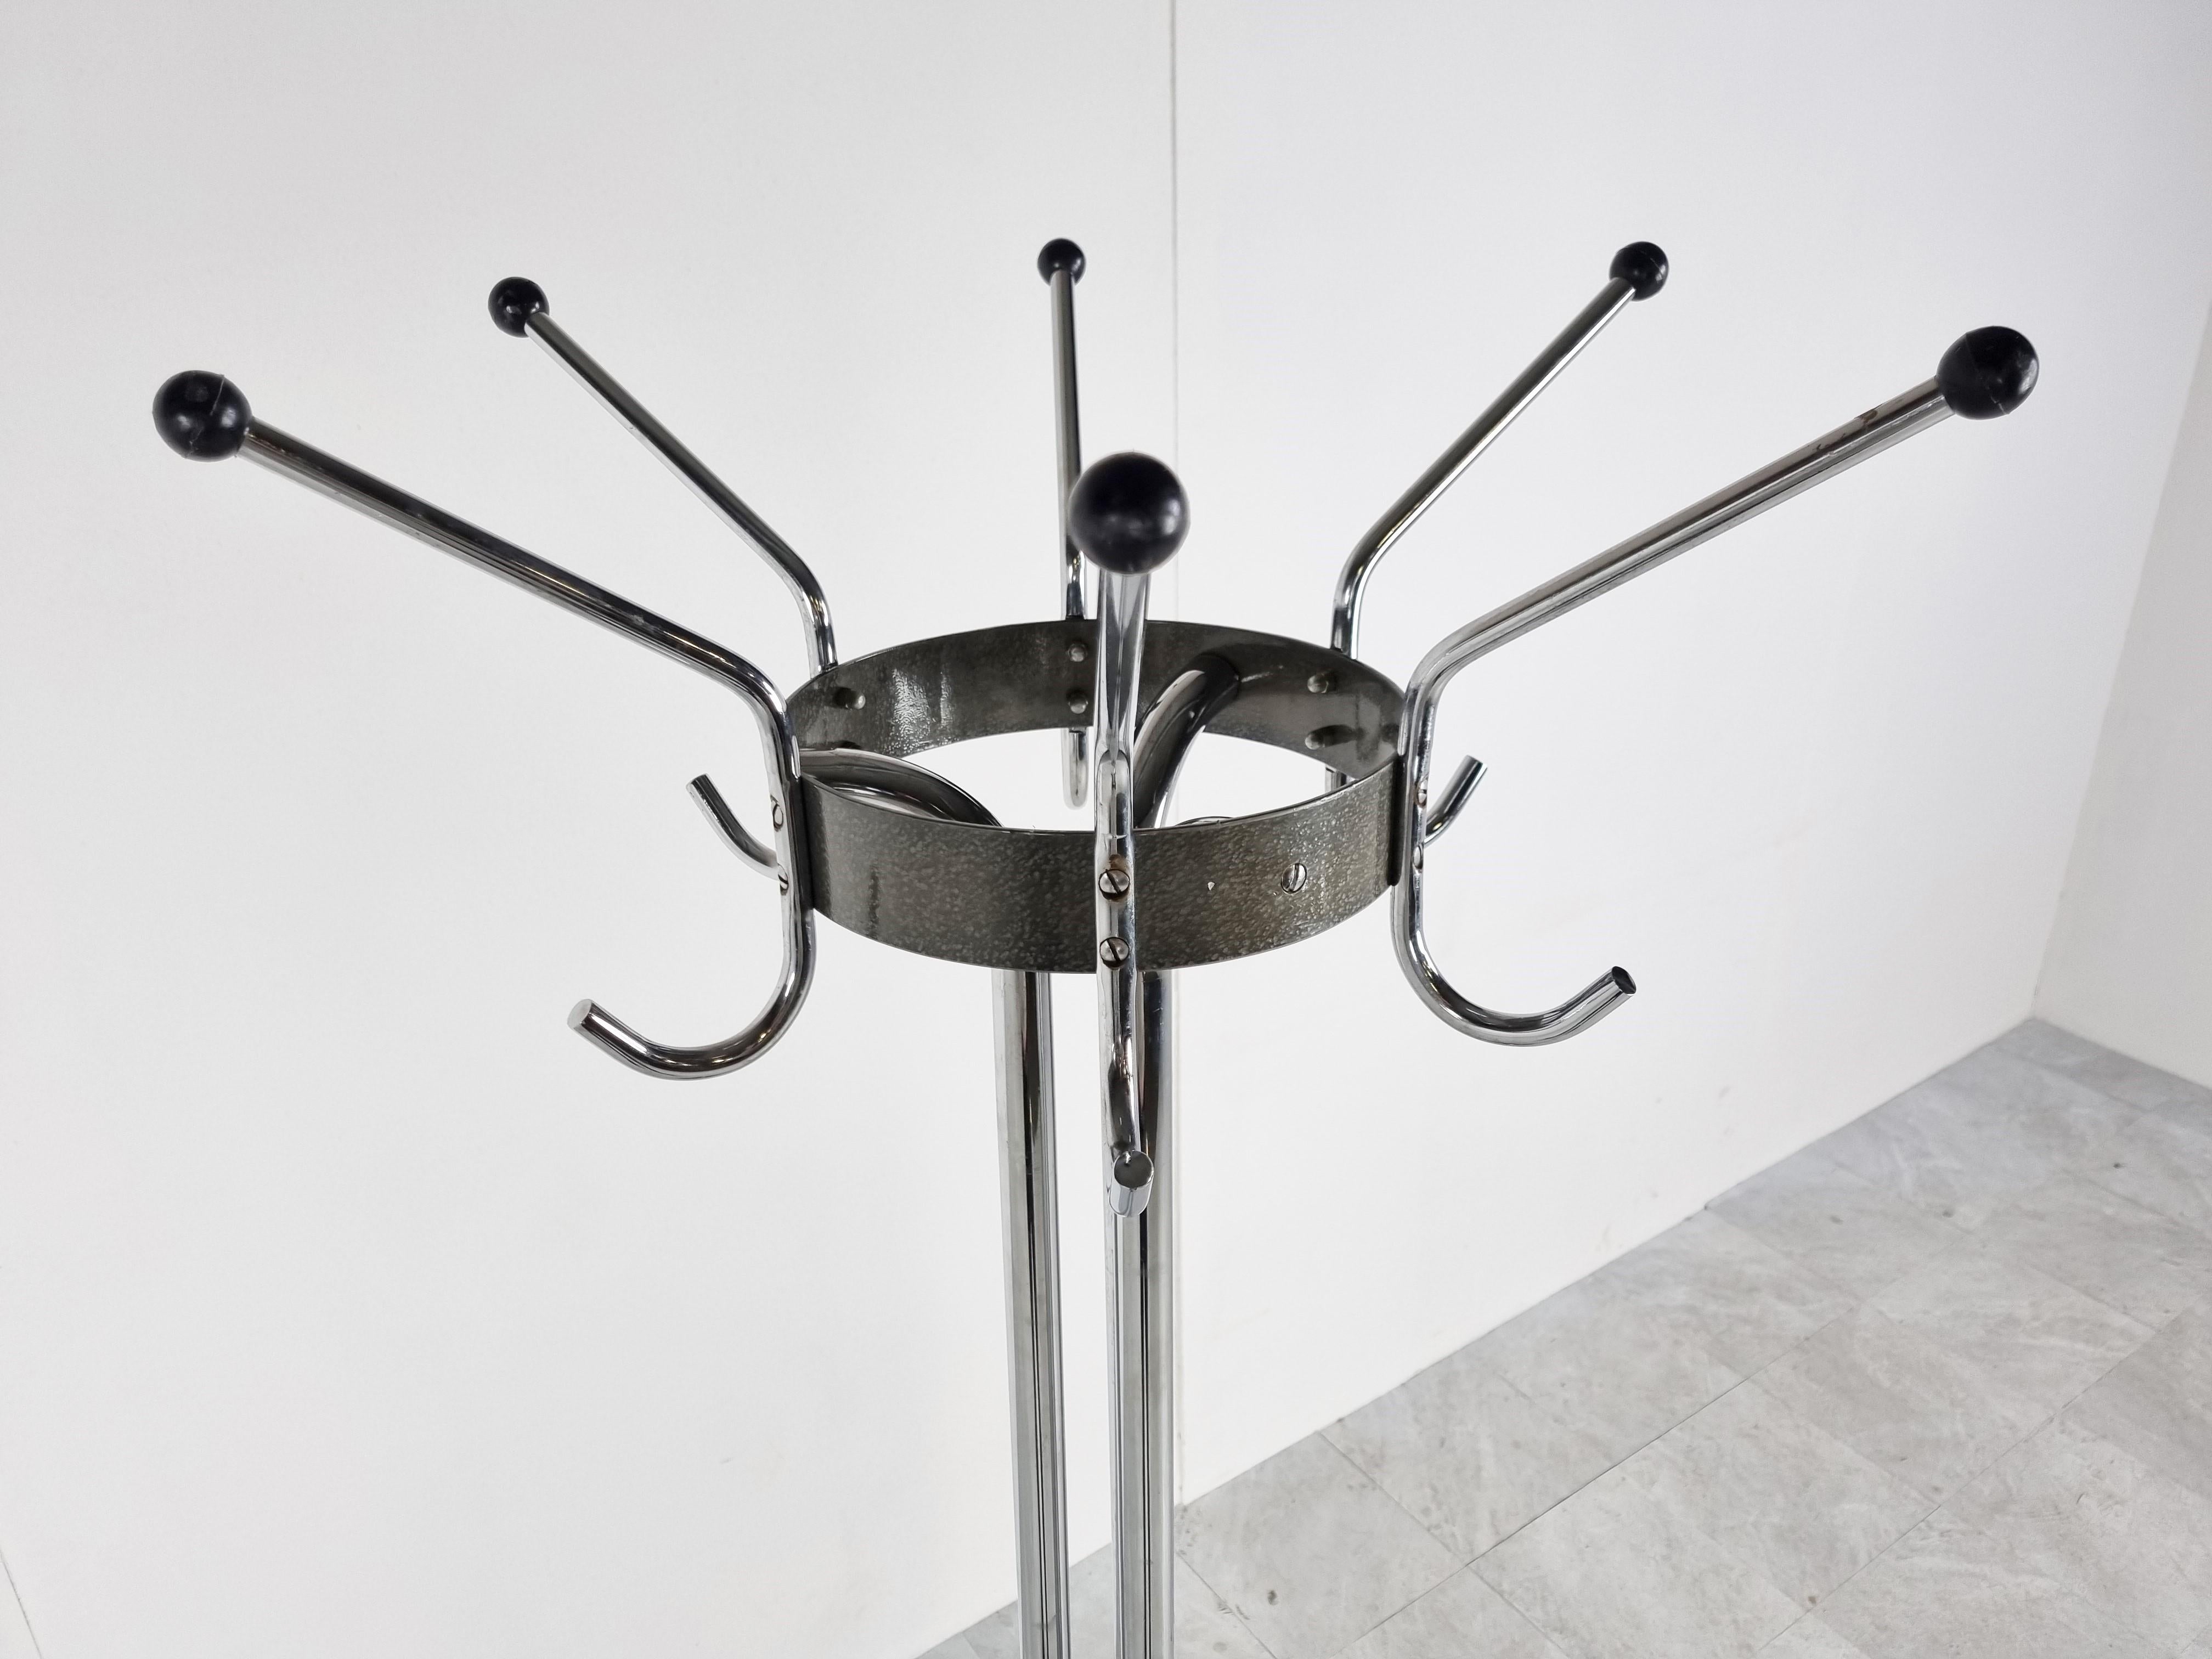 Vintage Chrome Coat Stands by Willy Van Der Meeren for Tubax, 1970s For Sale 1